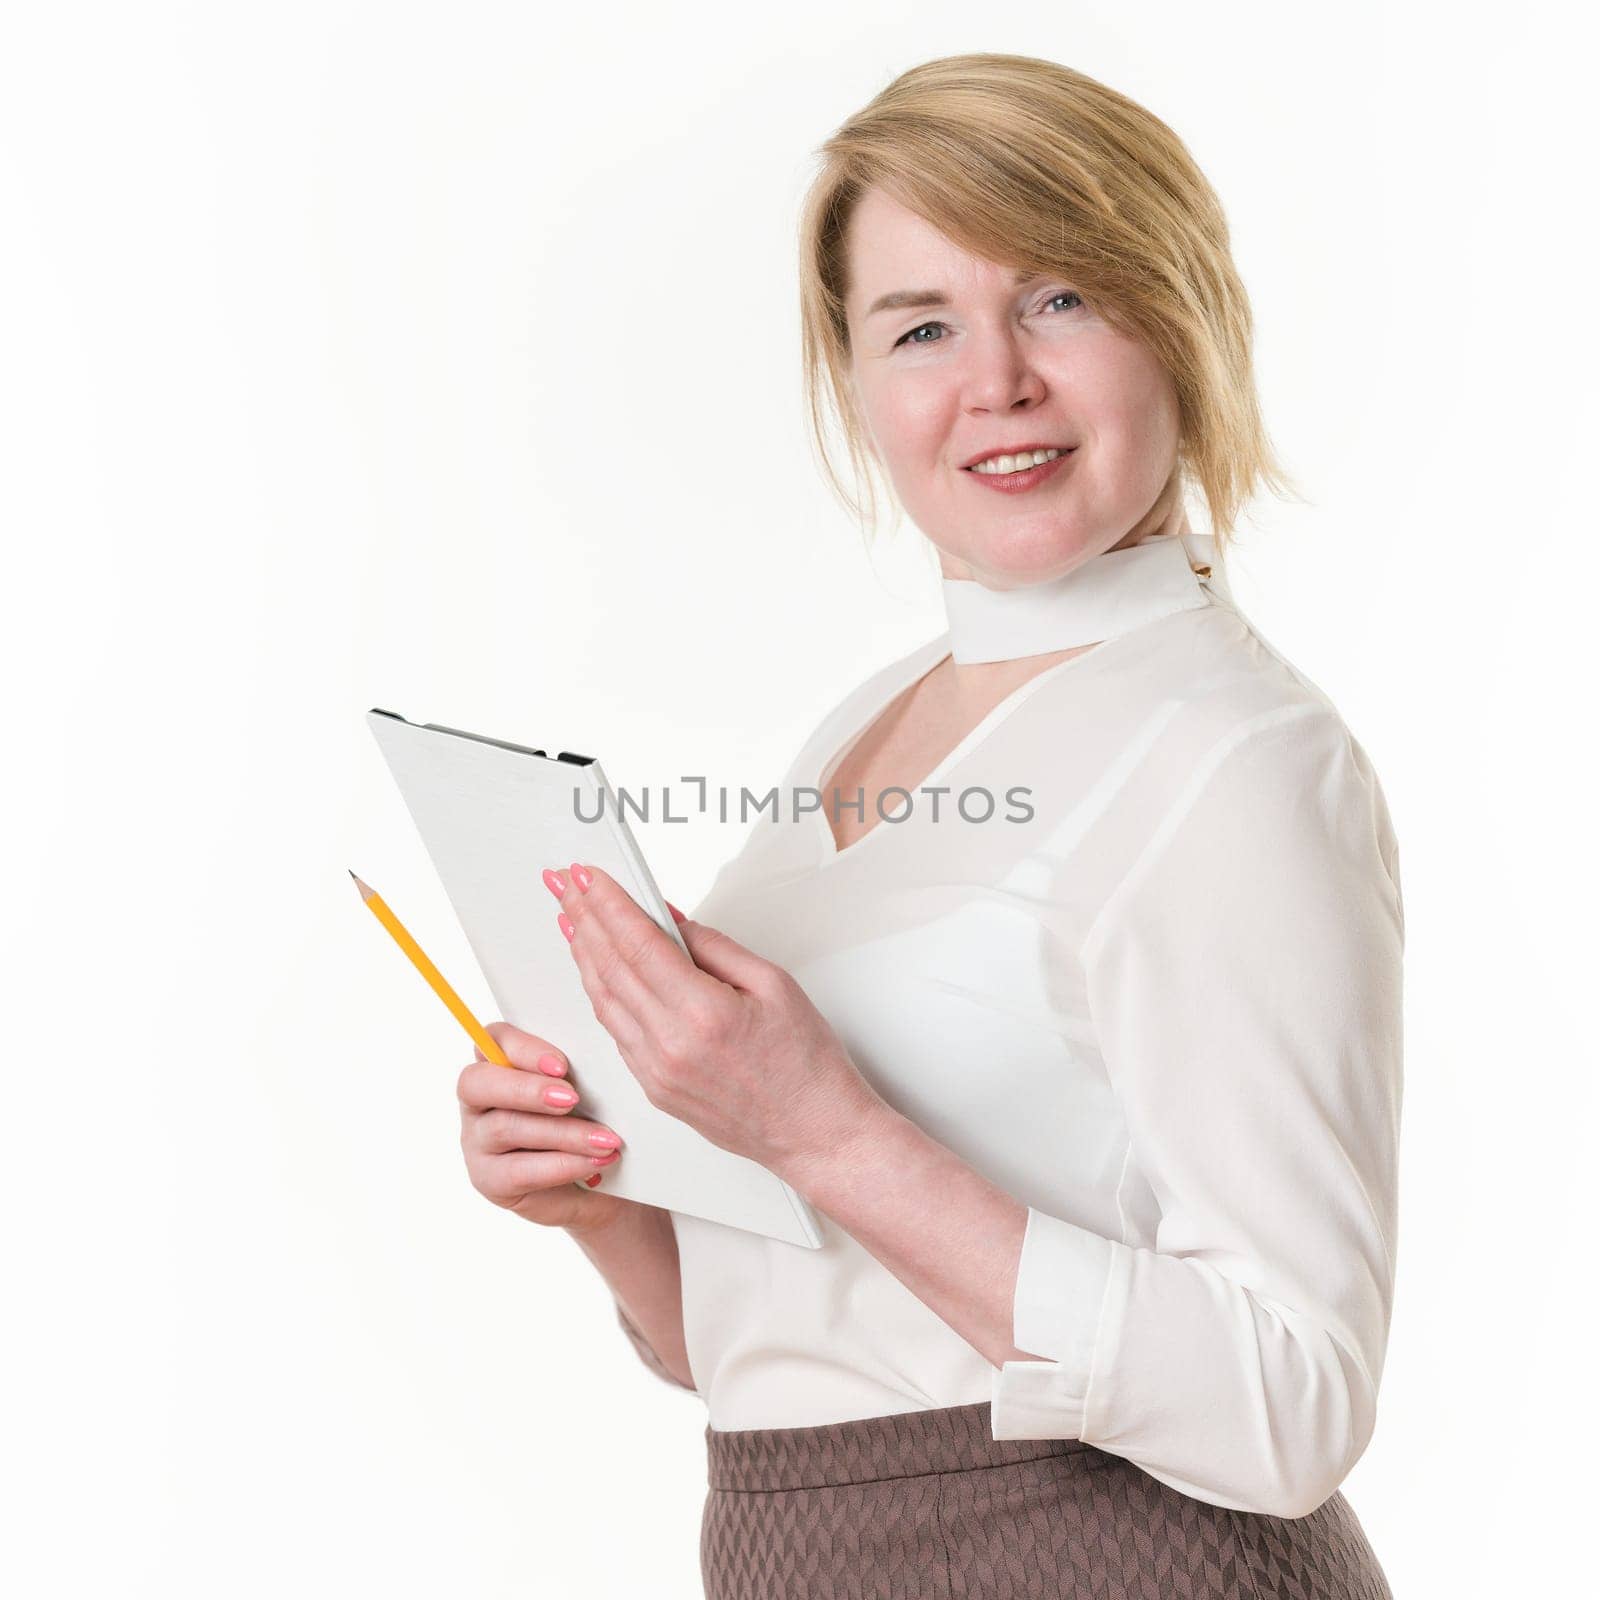 Portrait of sincere smiling and happy 49-year-old blonde businesswoman holding clipboard and pencil in hands, wearing in white blouse. Friendly and experienced woman entrepreneur looking at camera